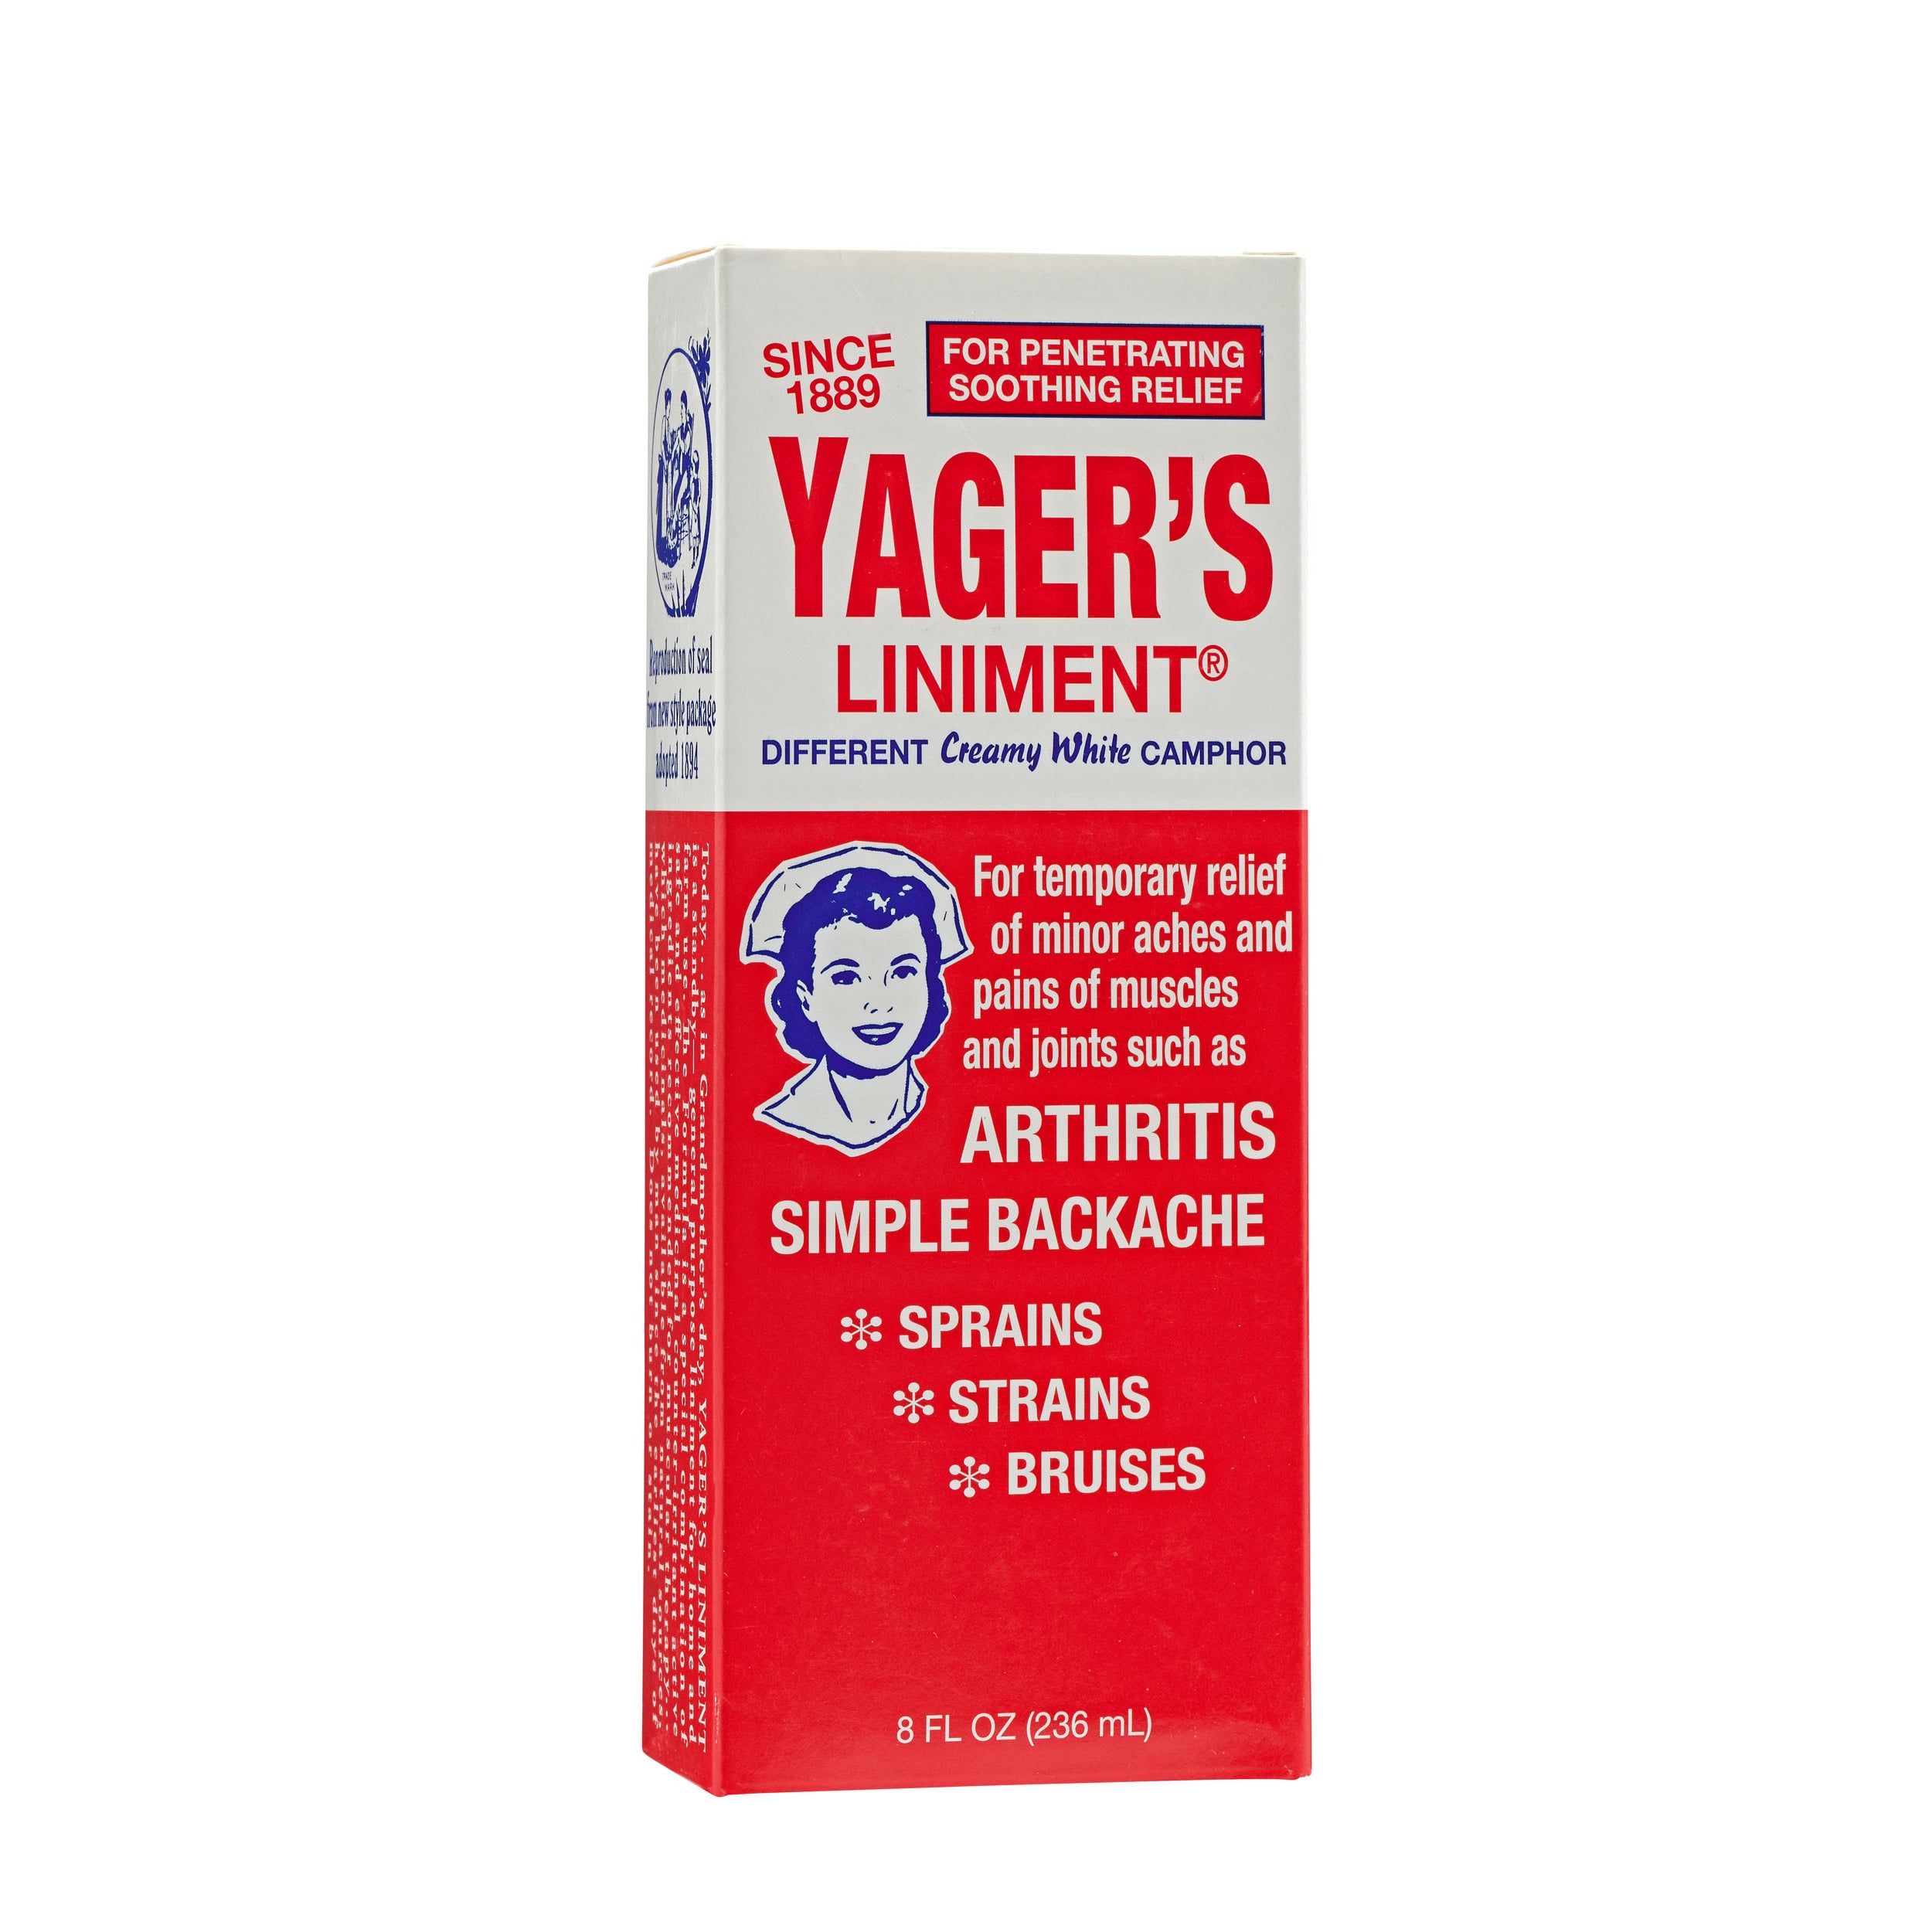 Yager’s Liniment- OUT OF STOCK